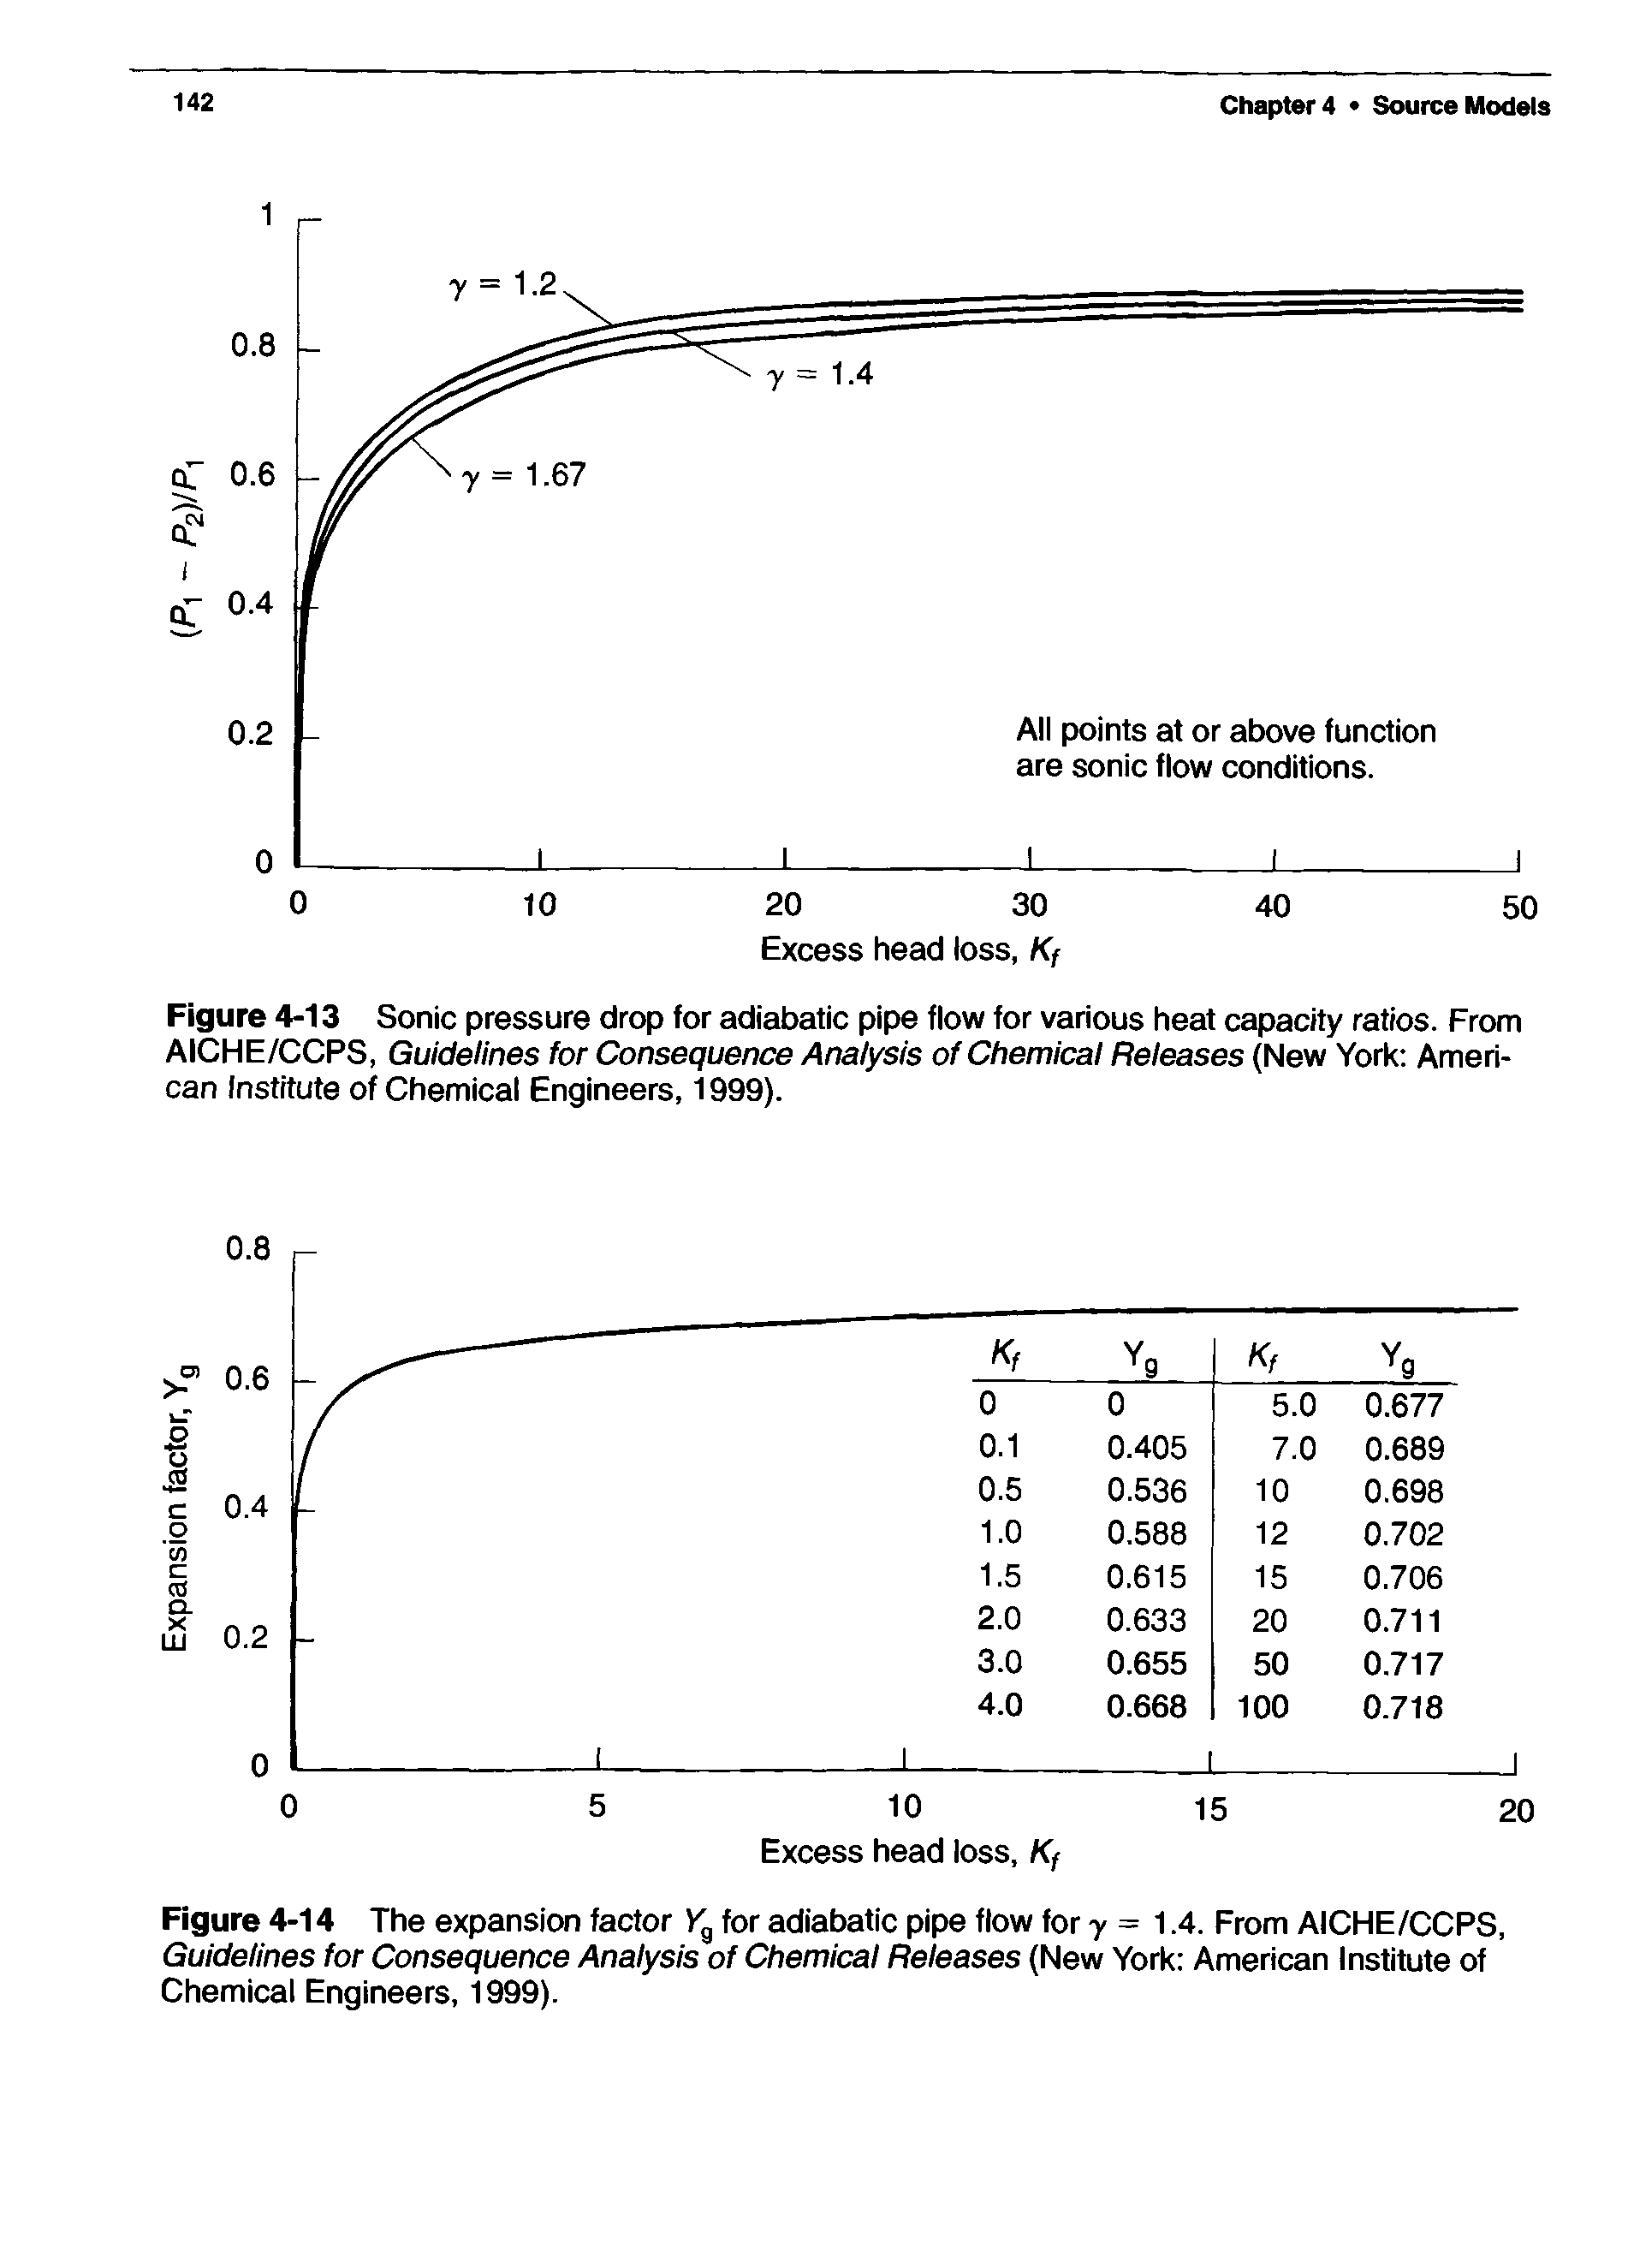 Figure 4-14 The expansion factor Kg for adiabatic pipe flow for y = 1.4. From AICHE/CCPS, Guidelines for Consequence Analysis of Chemical Releases (New York American Institute of Chemical Engineers, 1999).